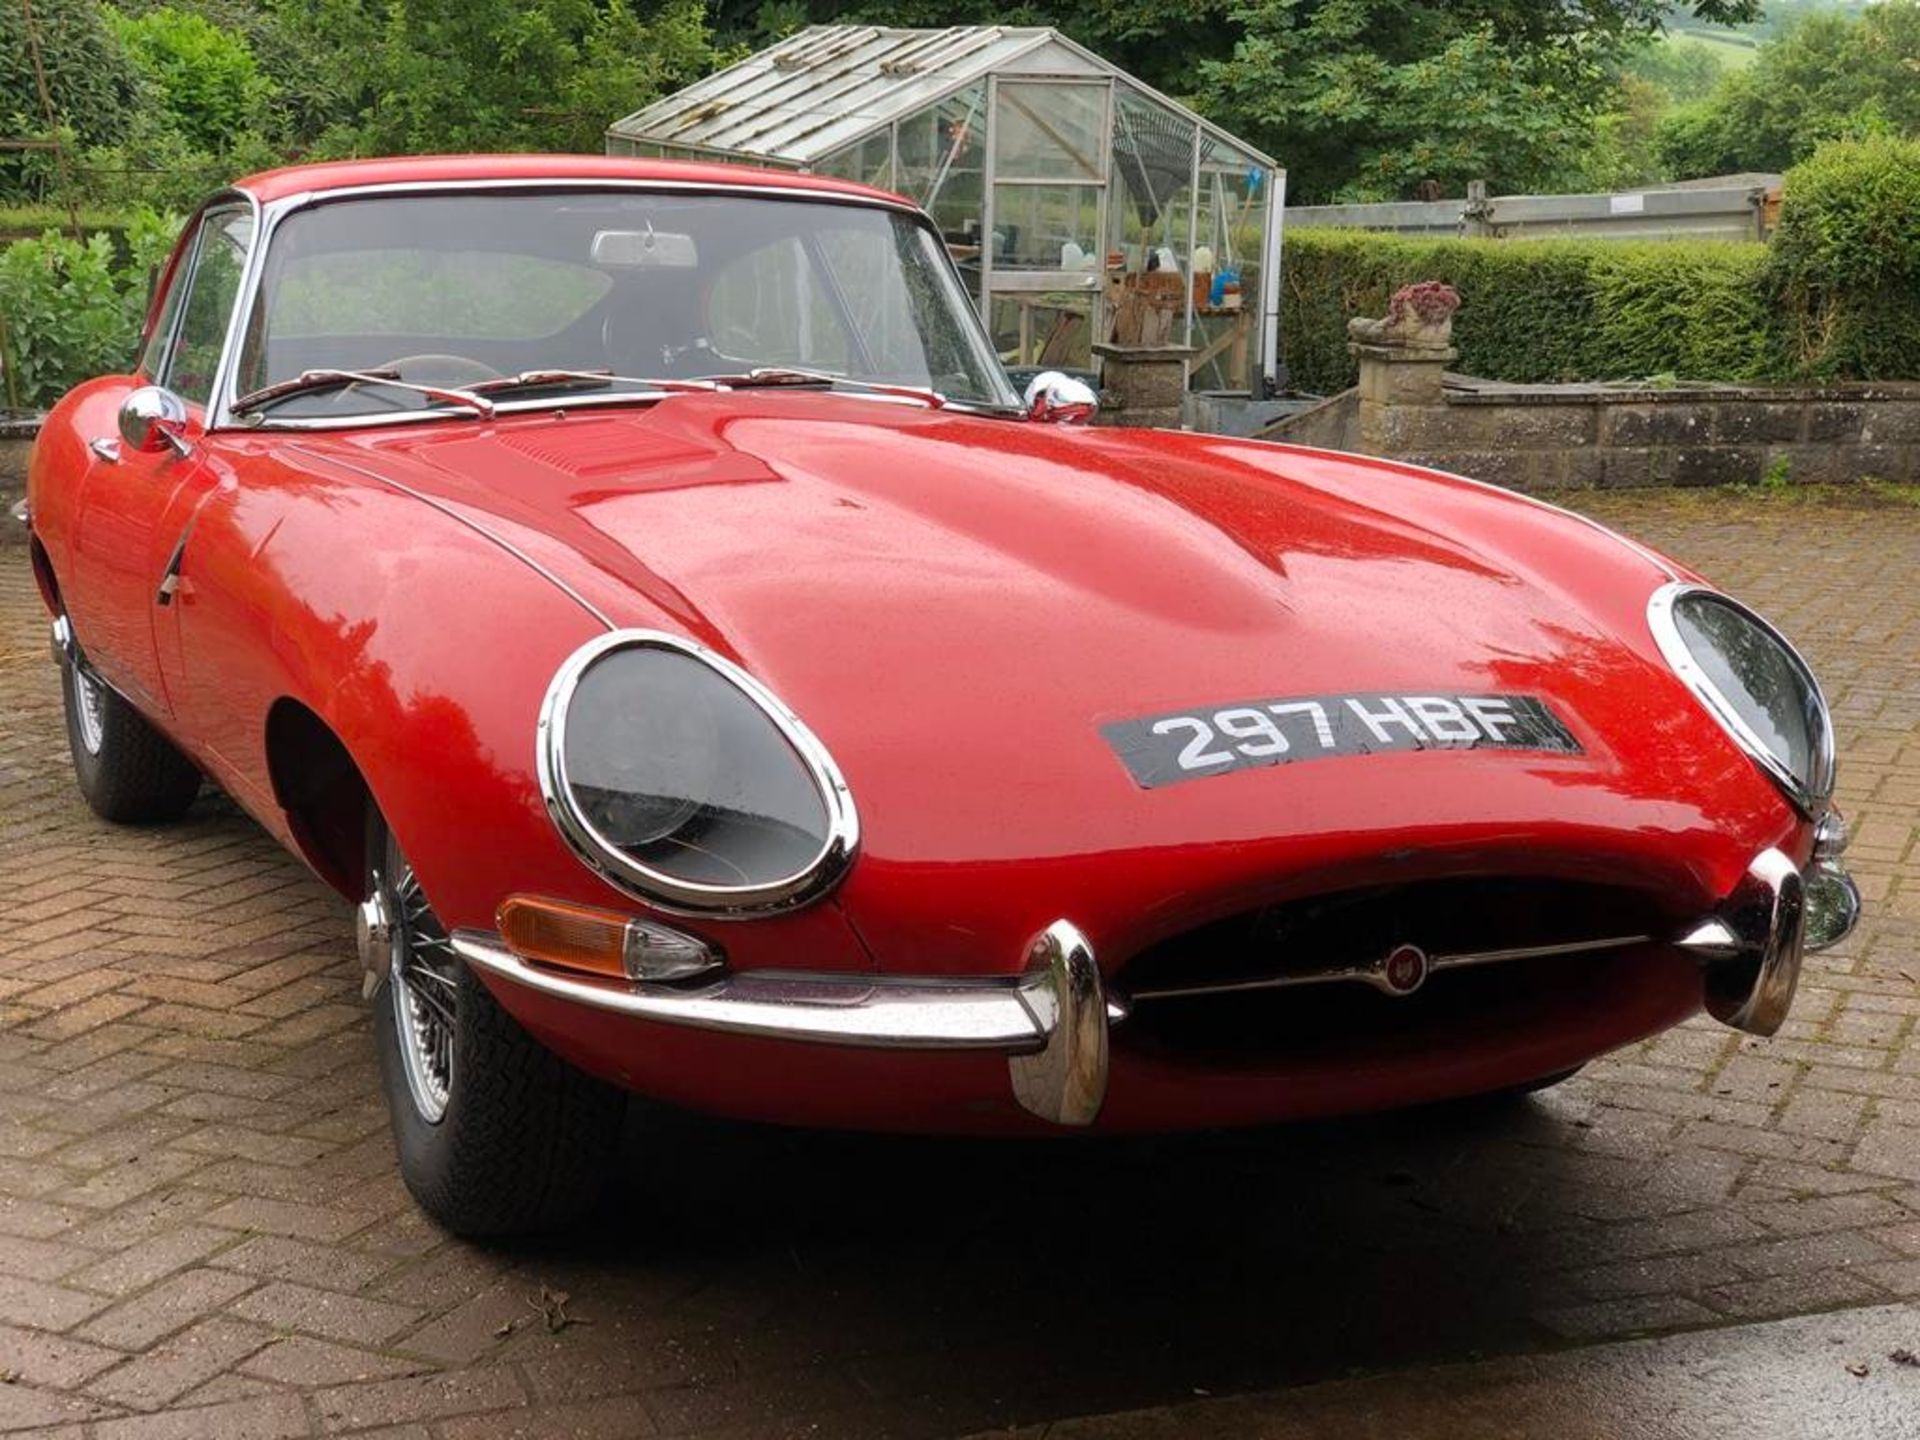 1962 Jaguar E-Type 3.8 Fixed Head Coupé Registration number 297 HBF Chassis number 860773 Engine - Image 26 of 160